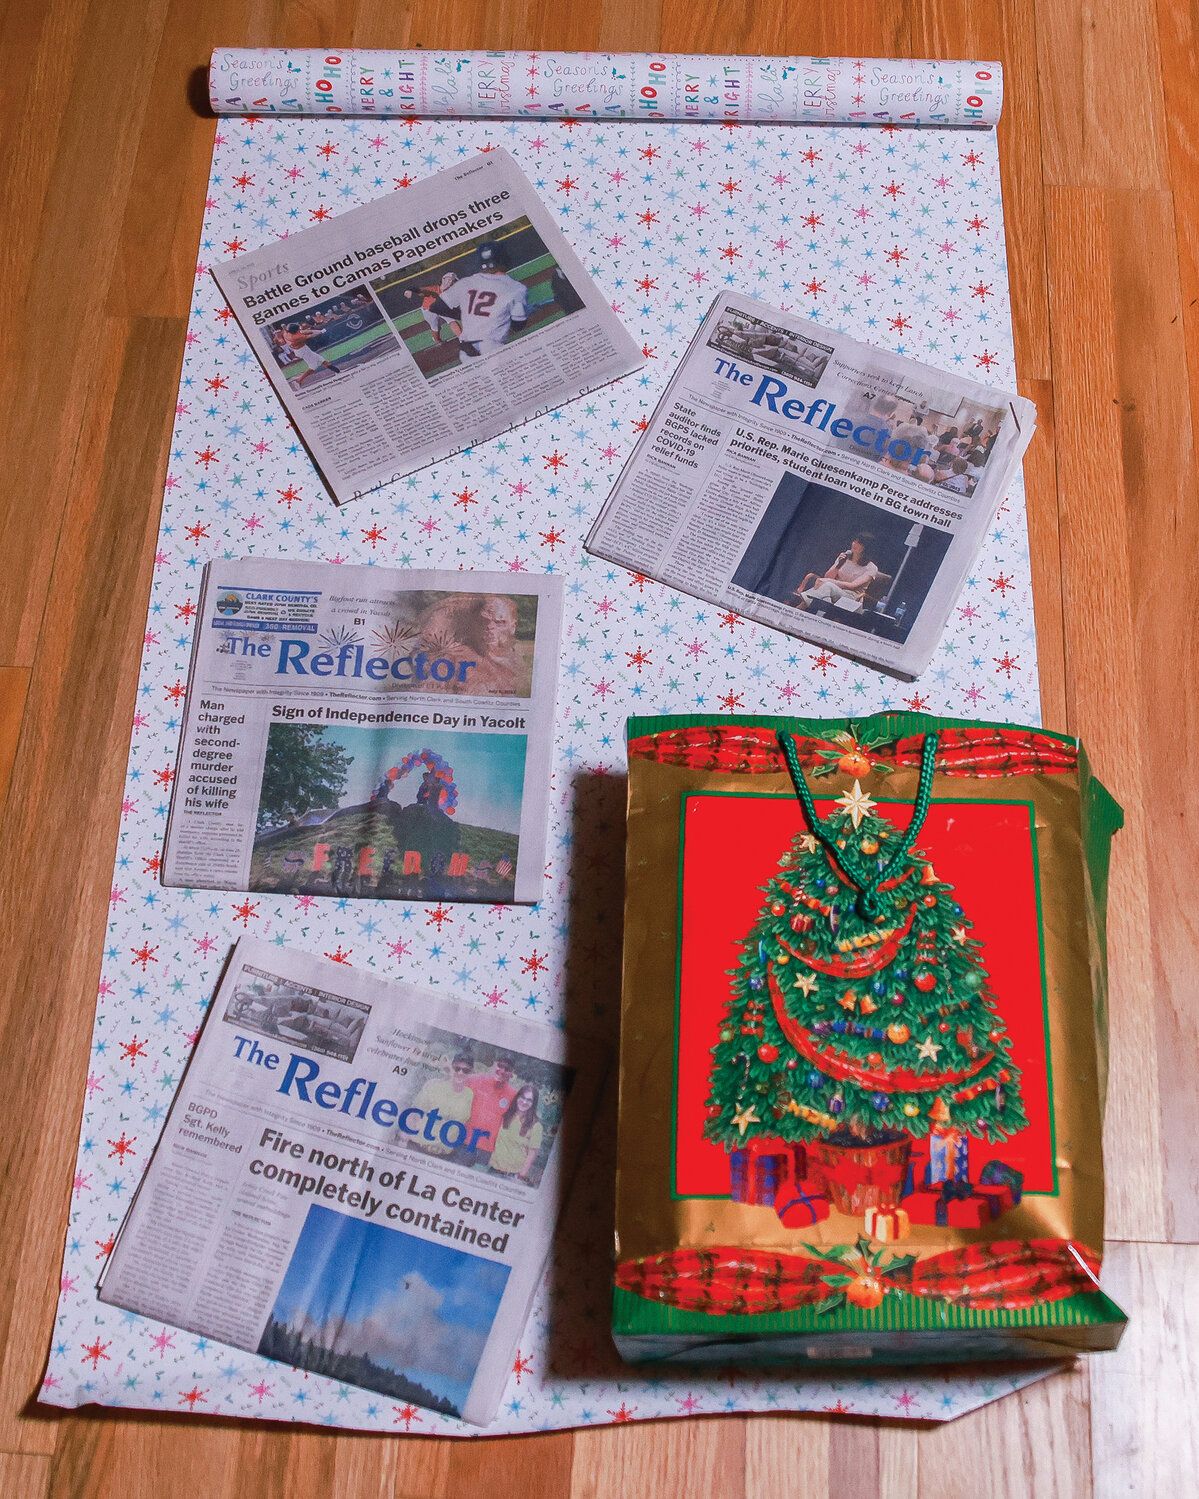 Clark County’s Solid Waste Education and Outreach team encourages the community to prevent holiday waste. In doing so, it encourages wrapping gifts in recyclable newspapers, brown paper bags or reusable bags, as opposed to wrapping paper.